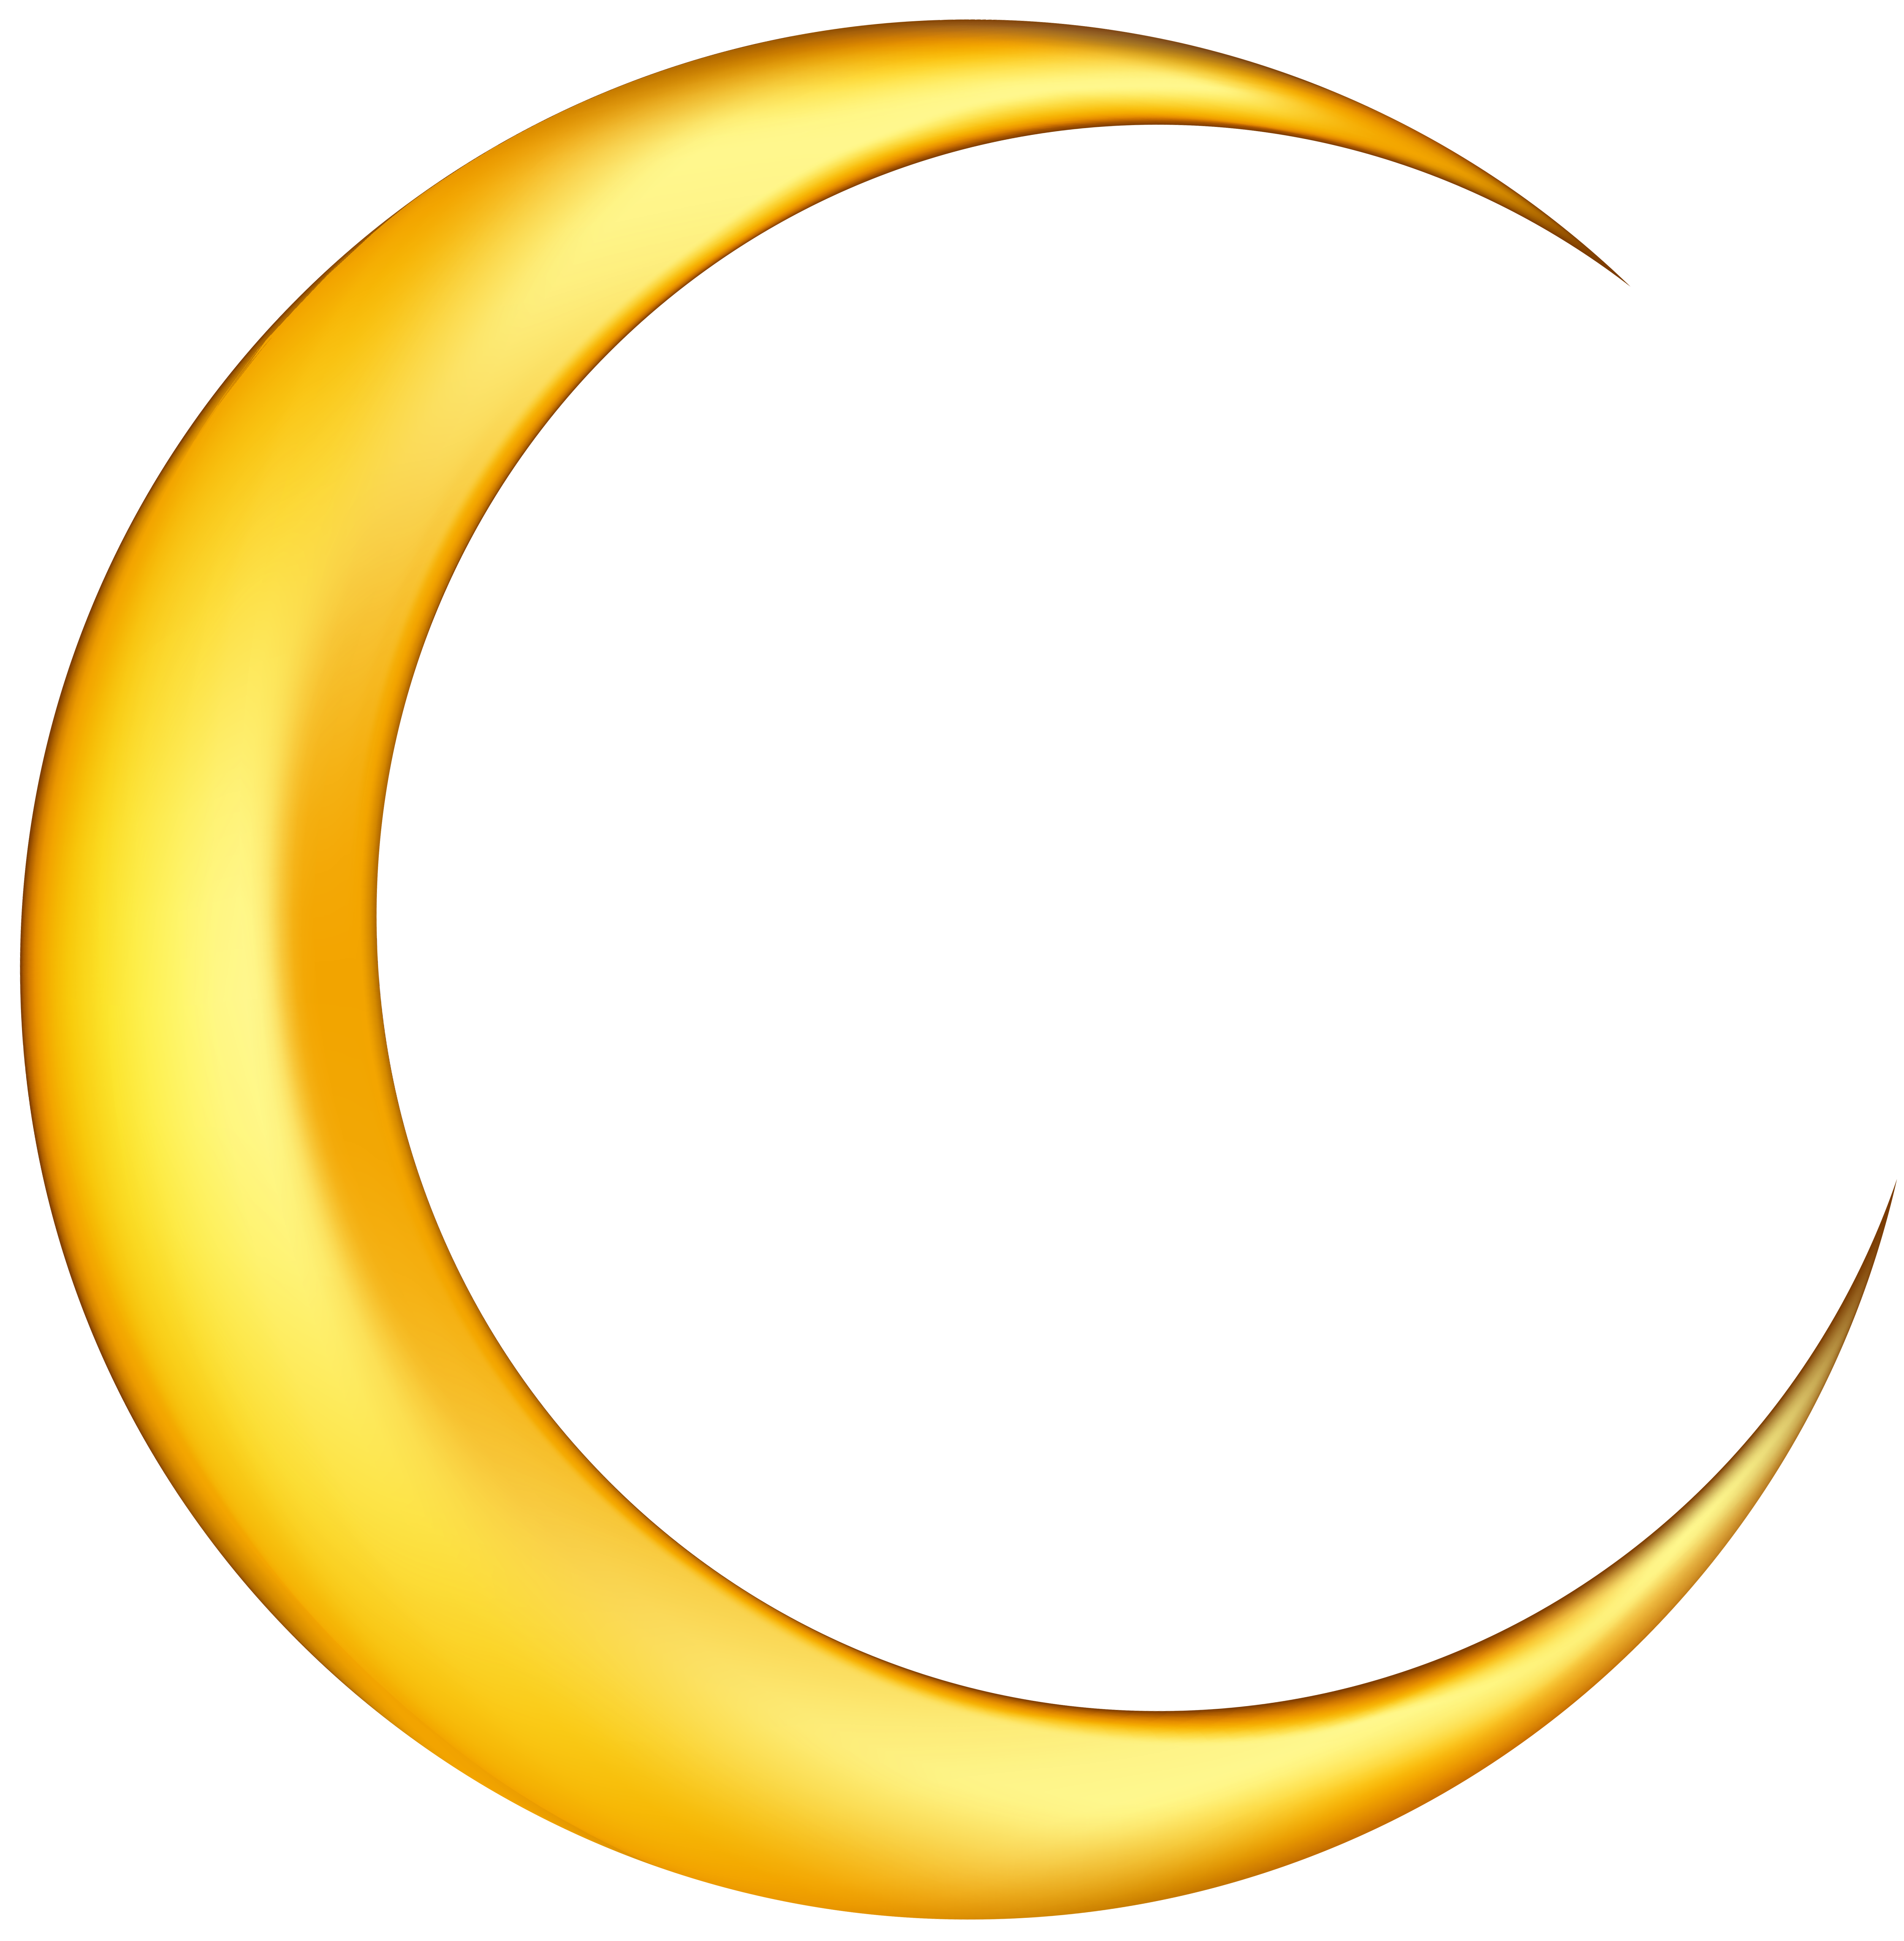 Moon clipart half moon, Moon half moon Transparent FREE for download on